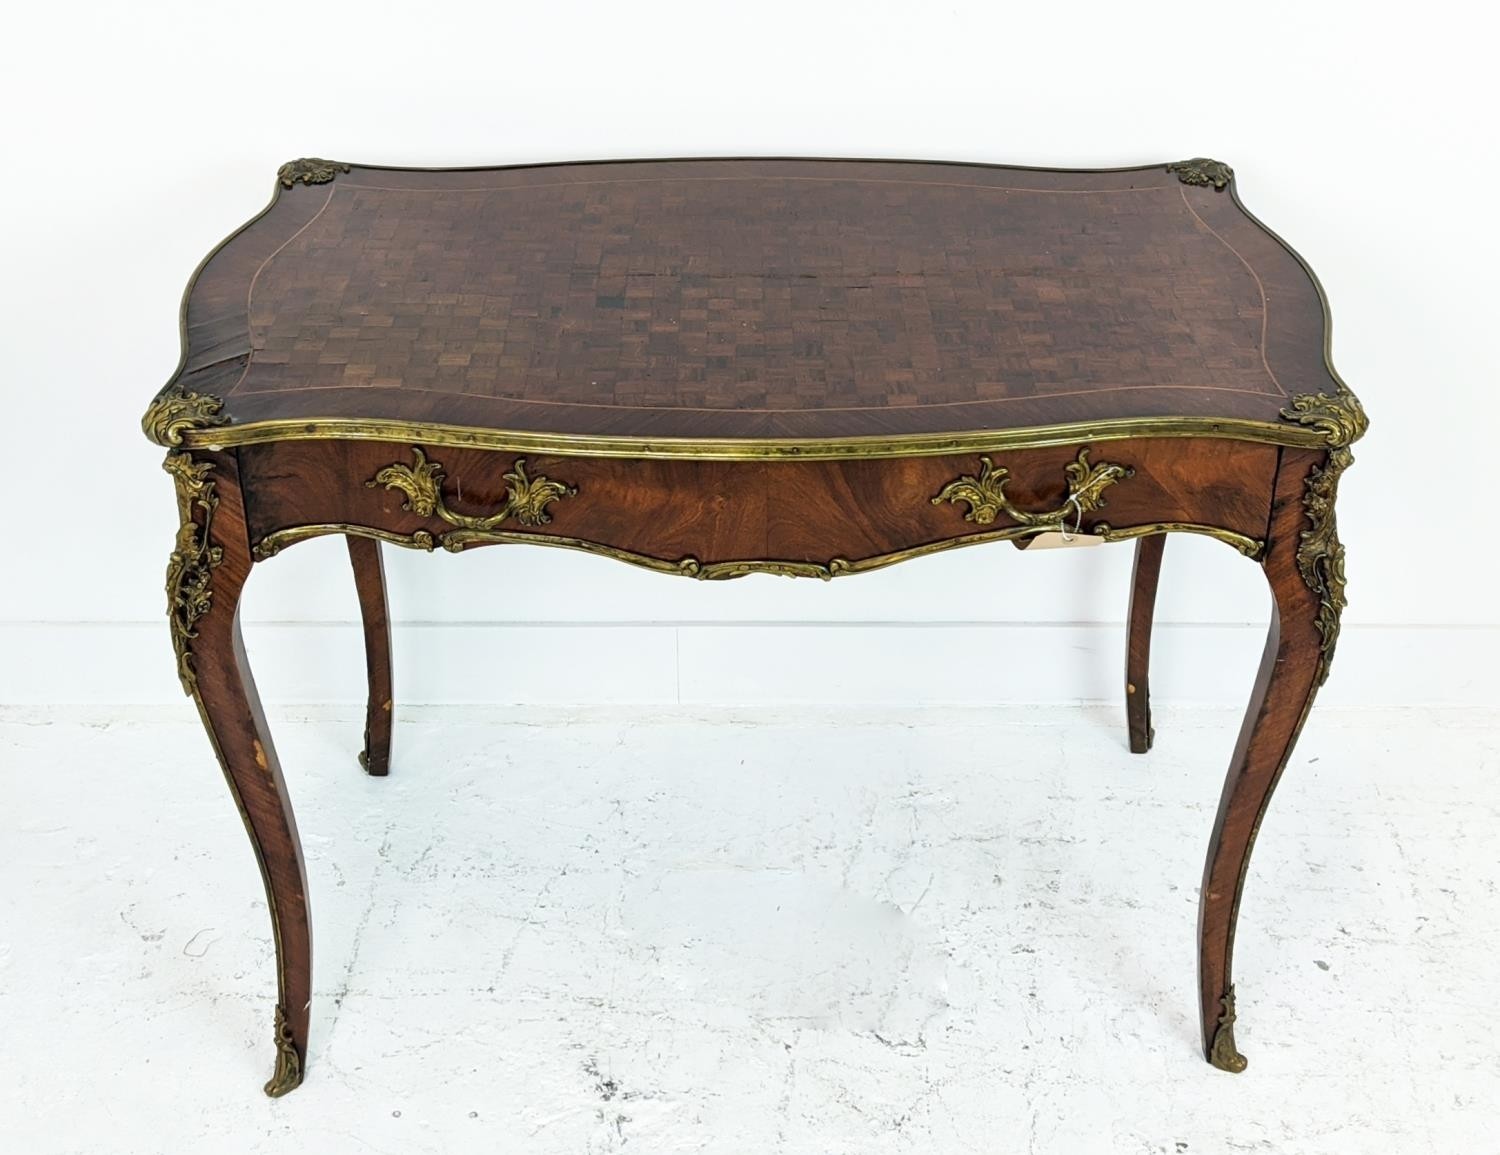 BUREAU PLAT, circa 1880, Louis XV style, French parquetry with ormolu mounts single long drawer - Image 3 of 22